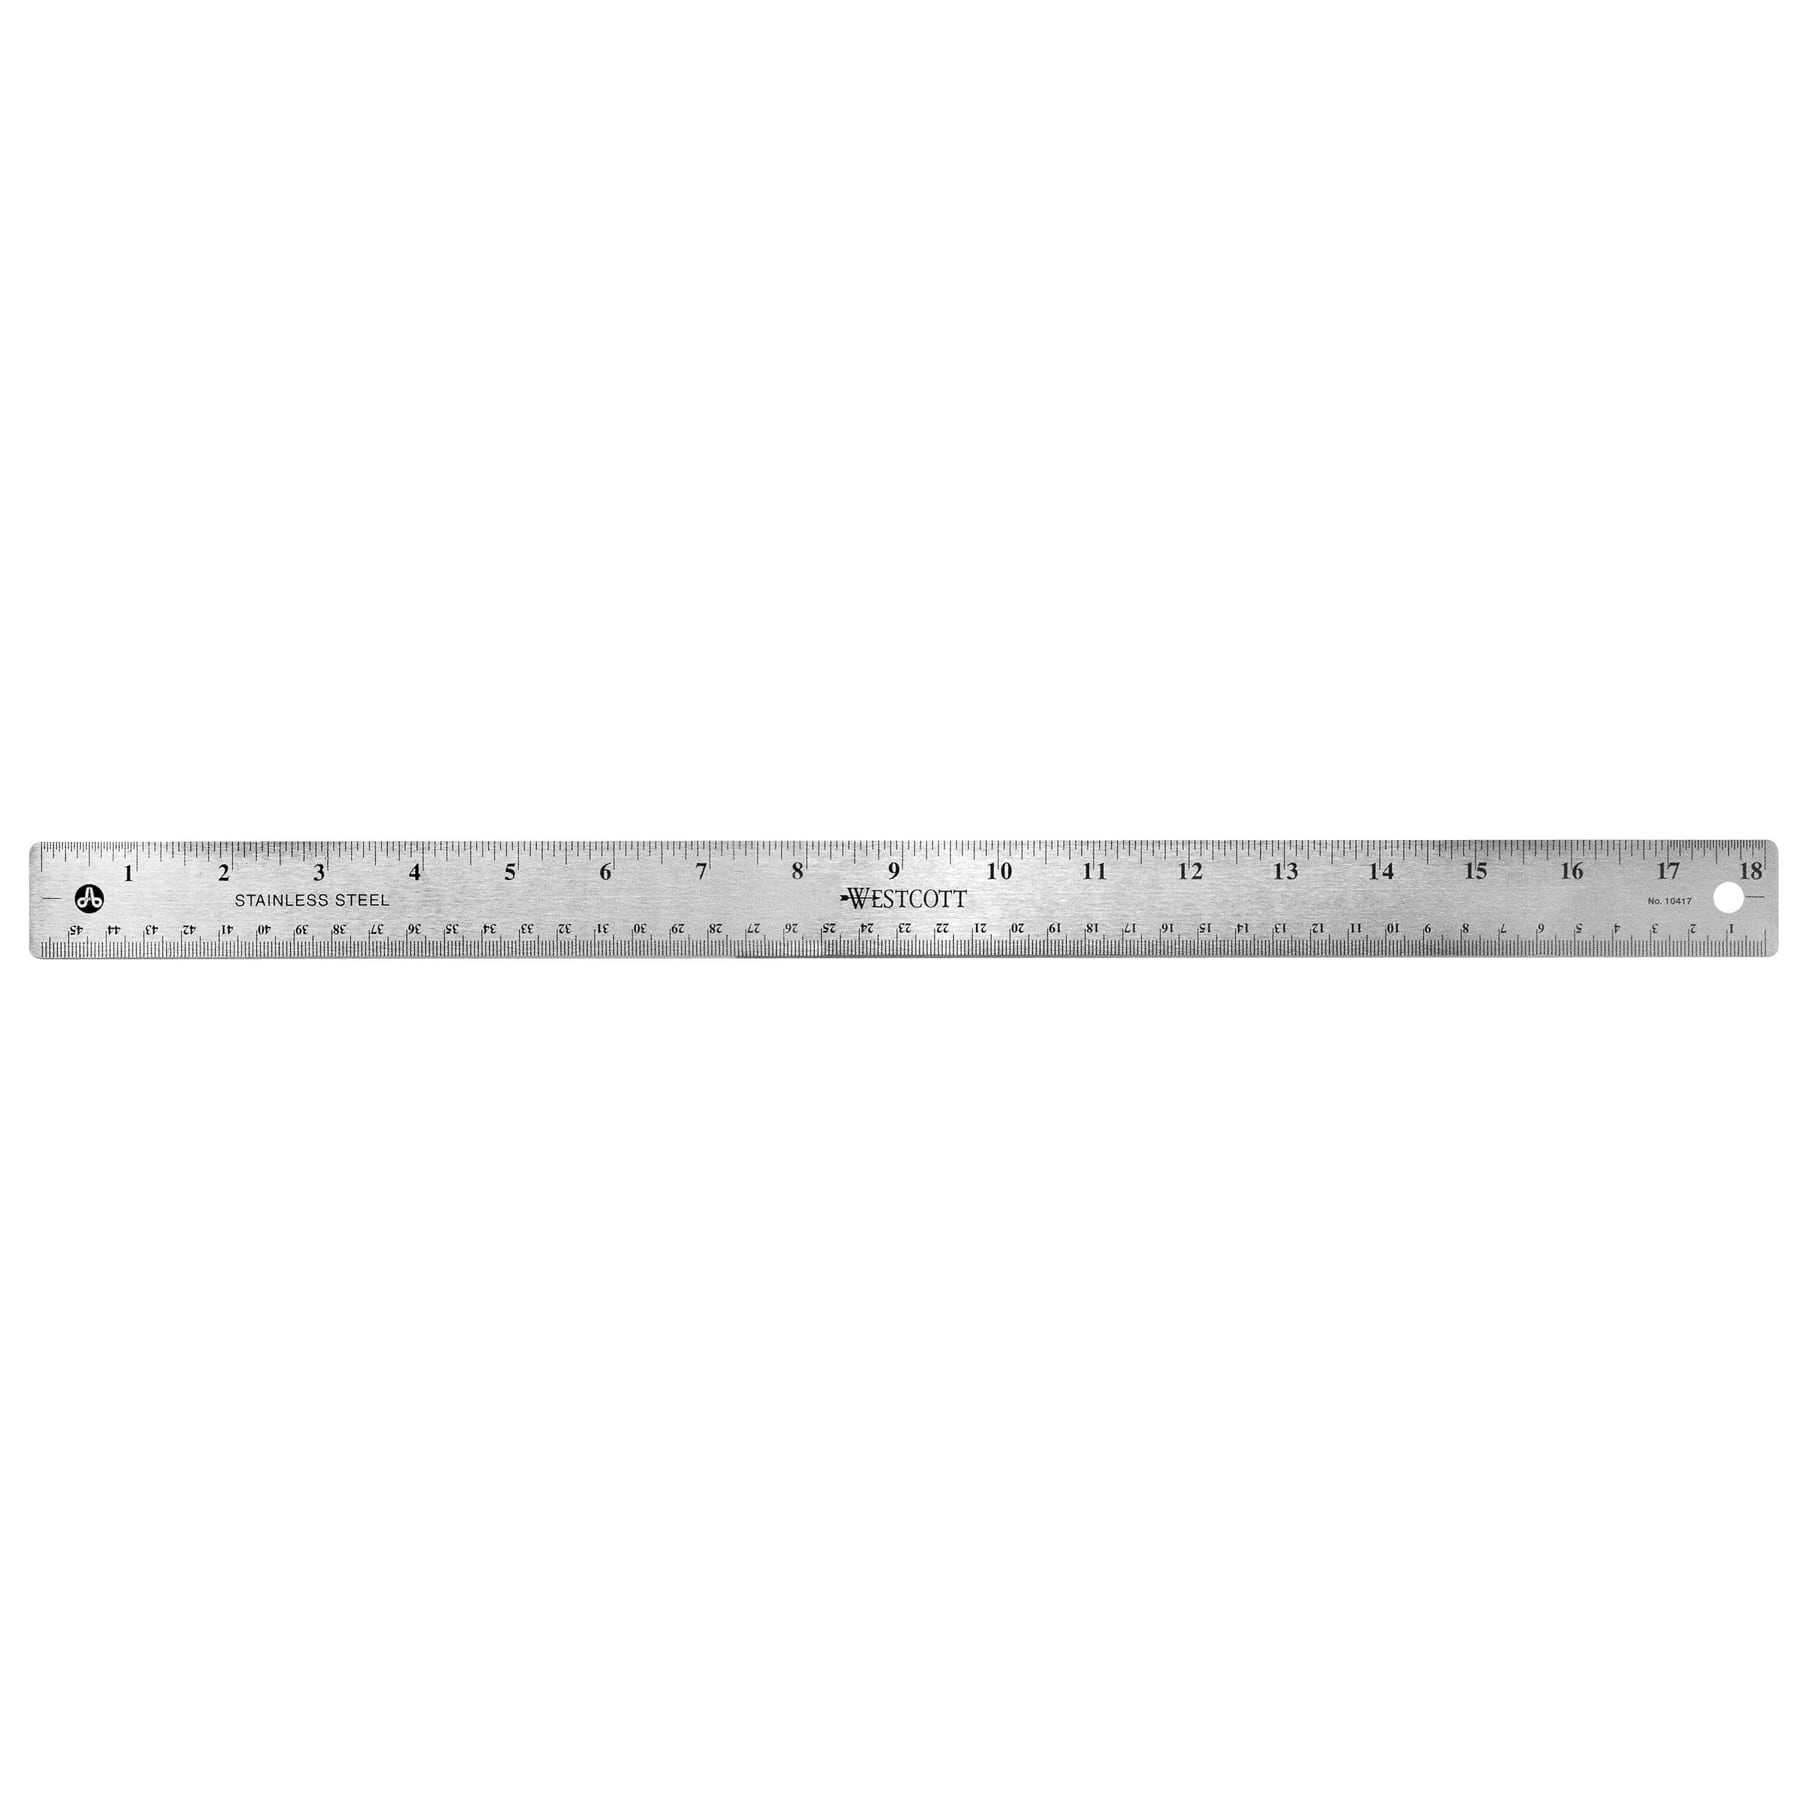 Ruler 18 Stainless Steel  Valencia College Campus Store